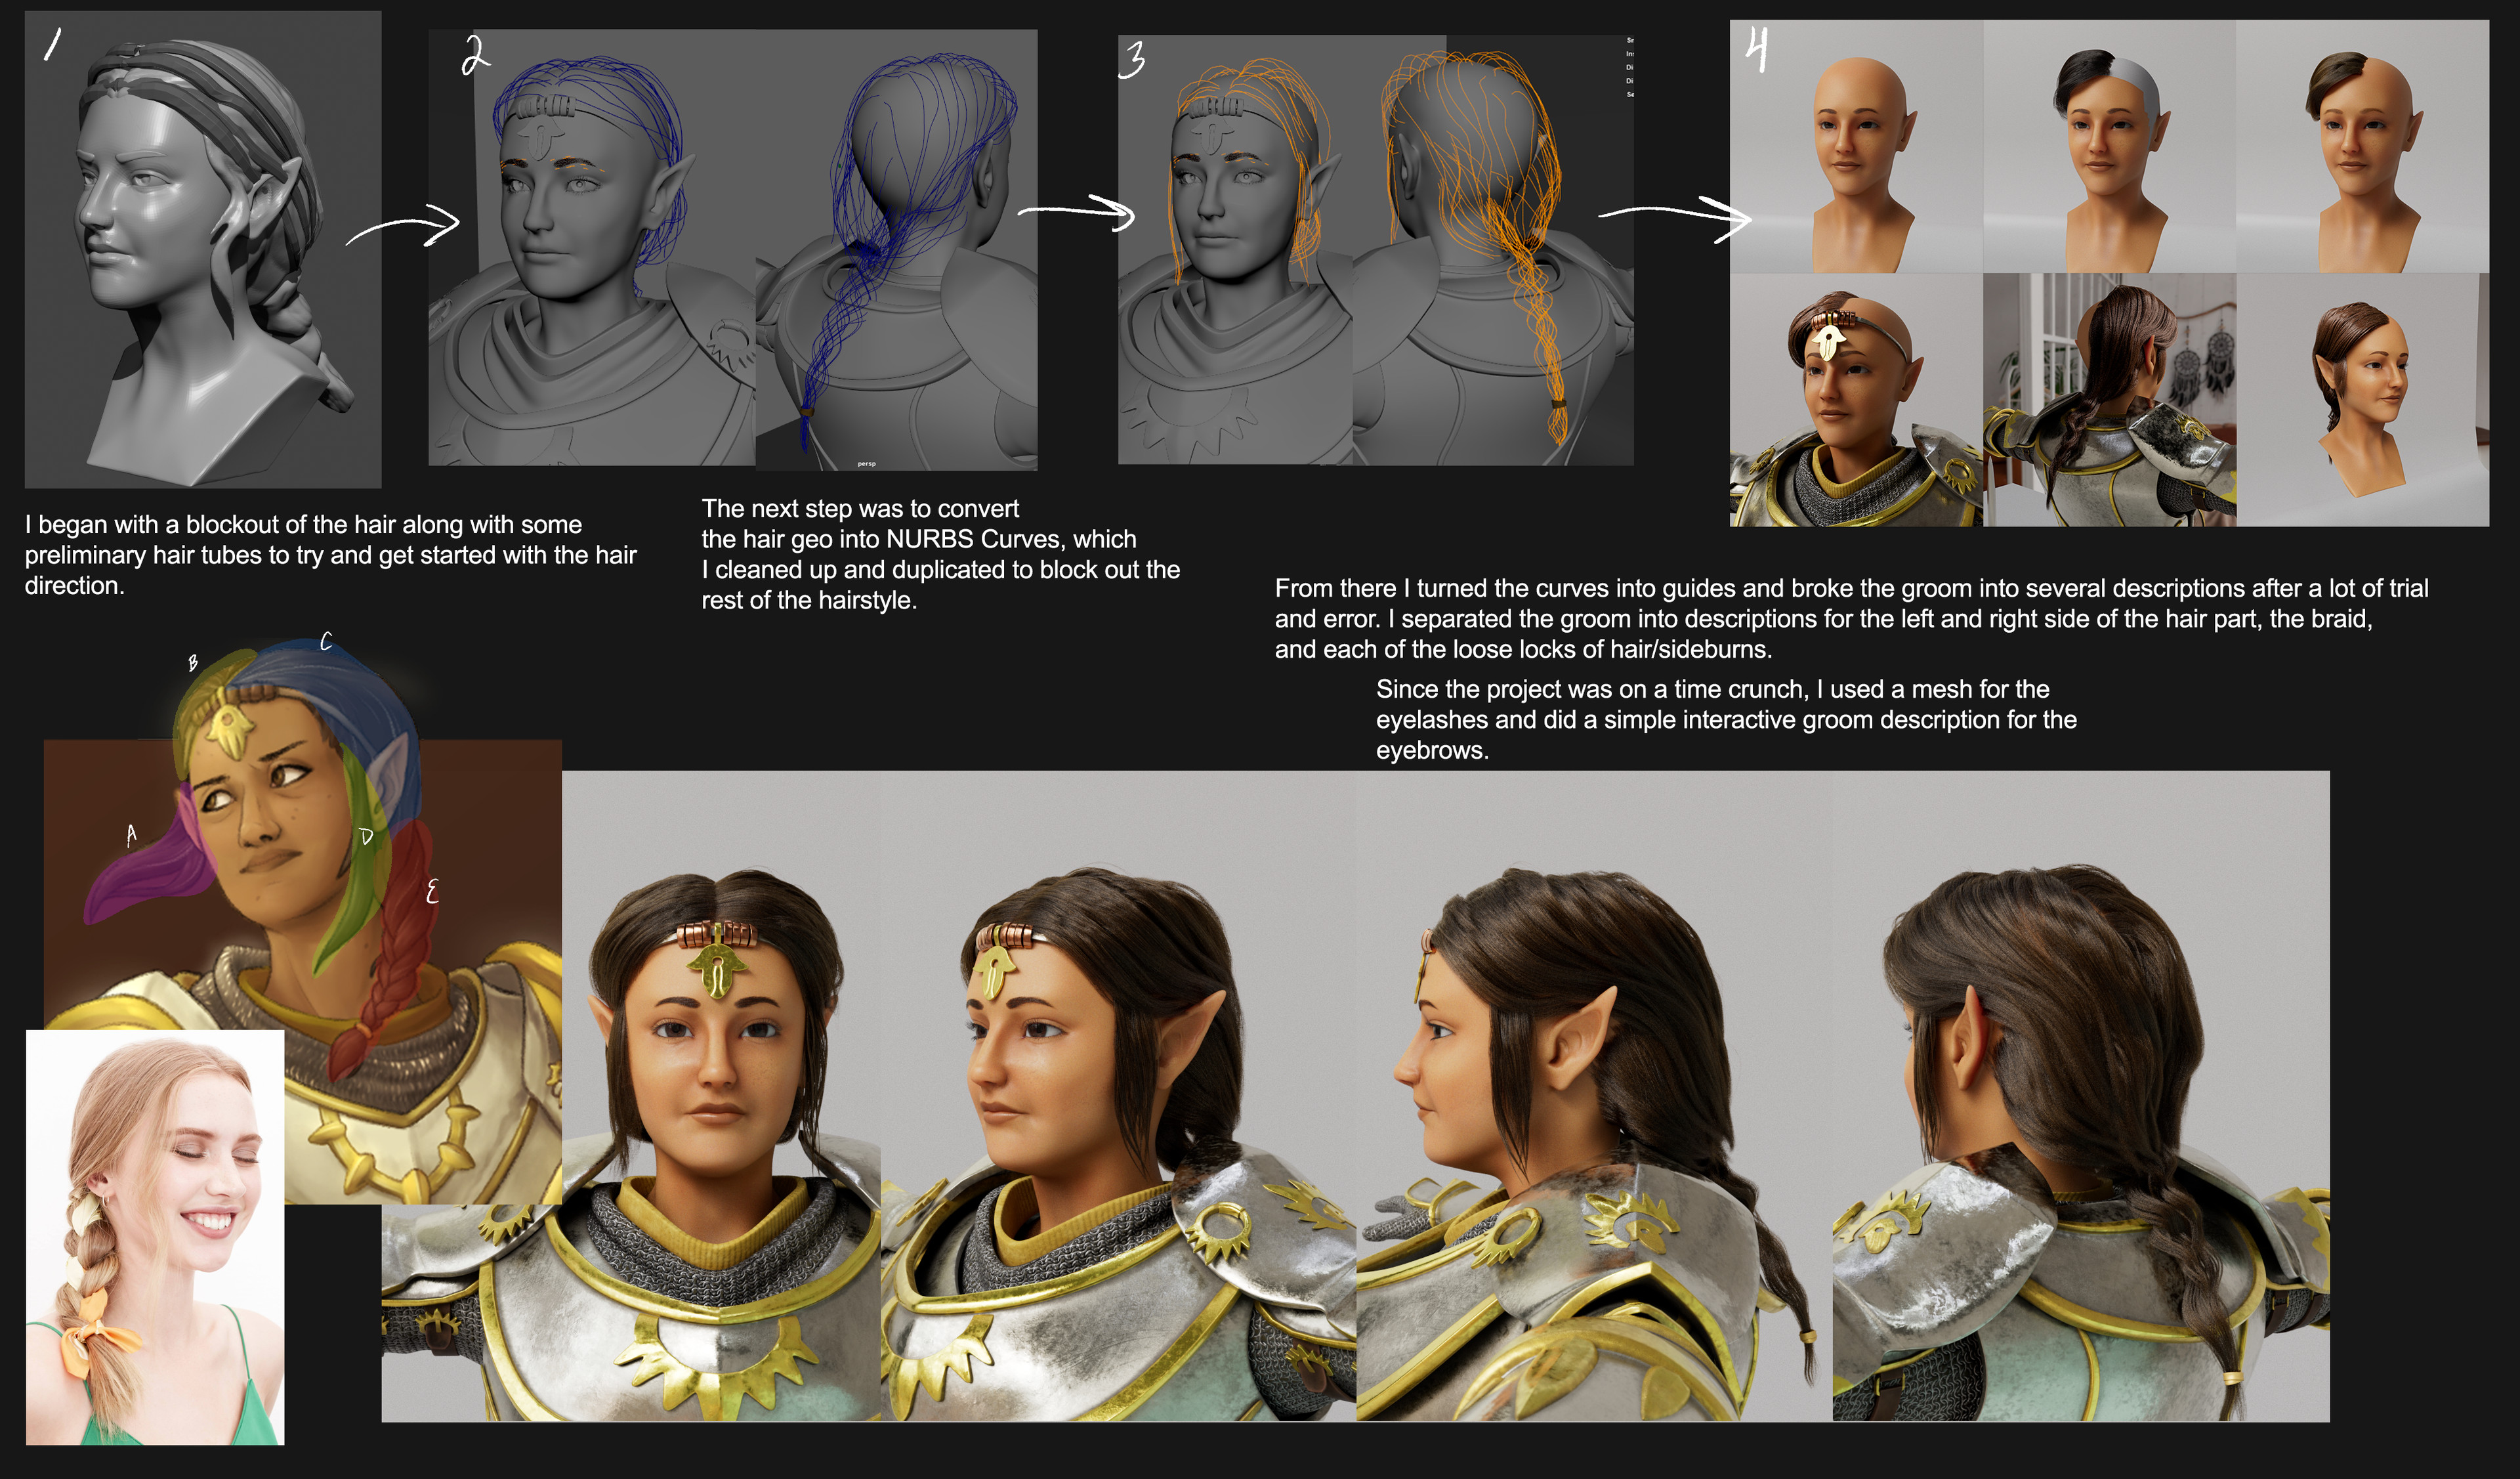 Breakdown of the groom.  The basic steps:
1) Hair blockout in Zbrush
2) Converting hair tubes to NURBS curves + cleanup
3) NURBS Curves to Groom guides
4) Lookdev and experimenting with how to break up the descriptions